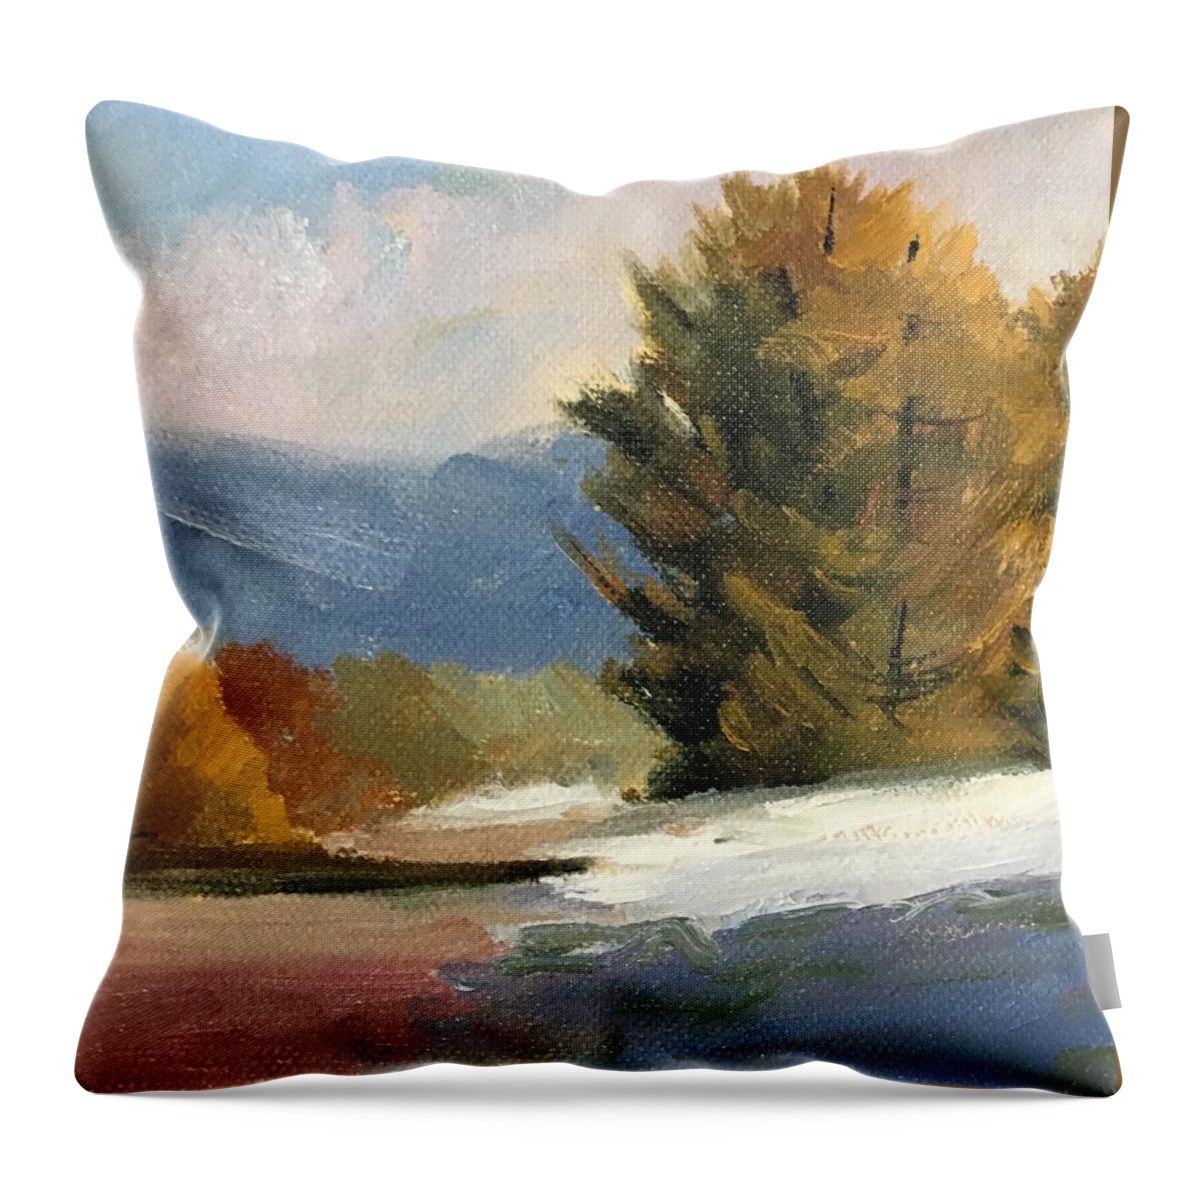 Northwest Landscape.winter Landscape Throw Pillow featuring the painting Melting Snow by Nancy Merkle